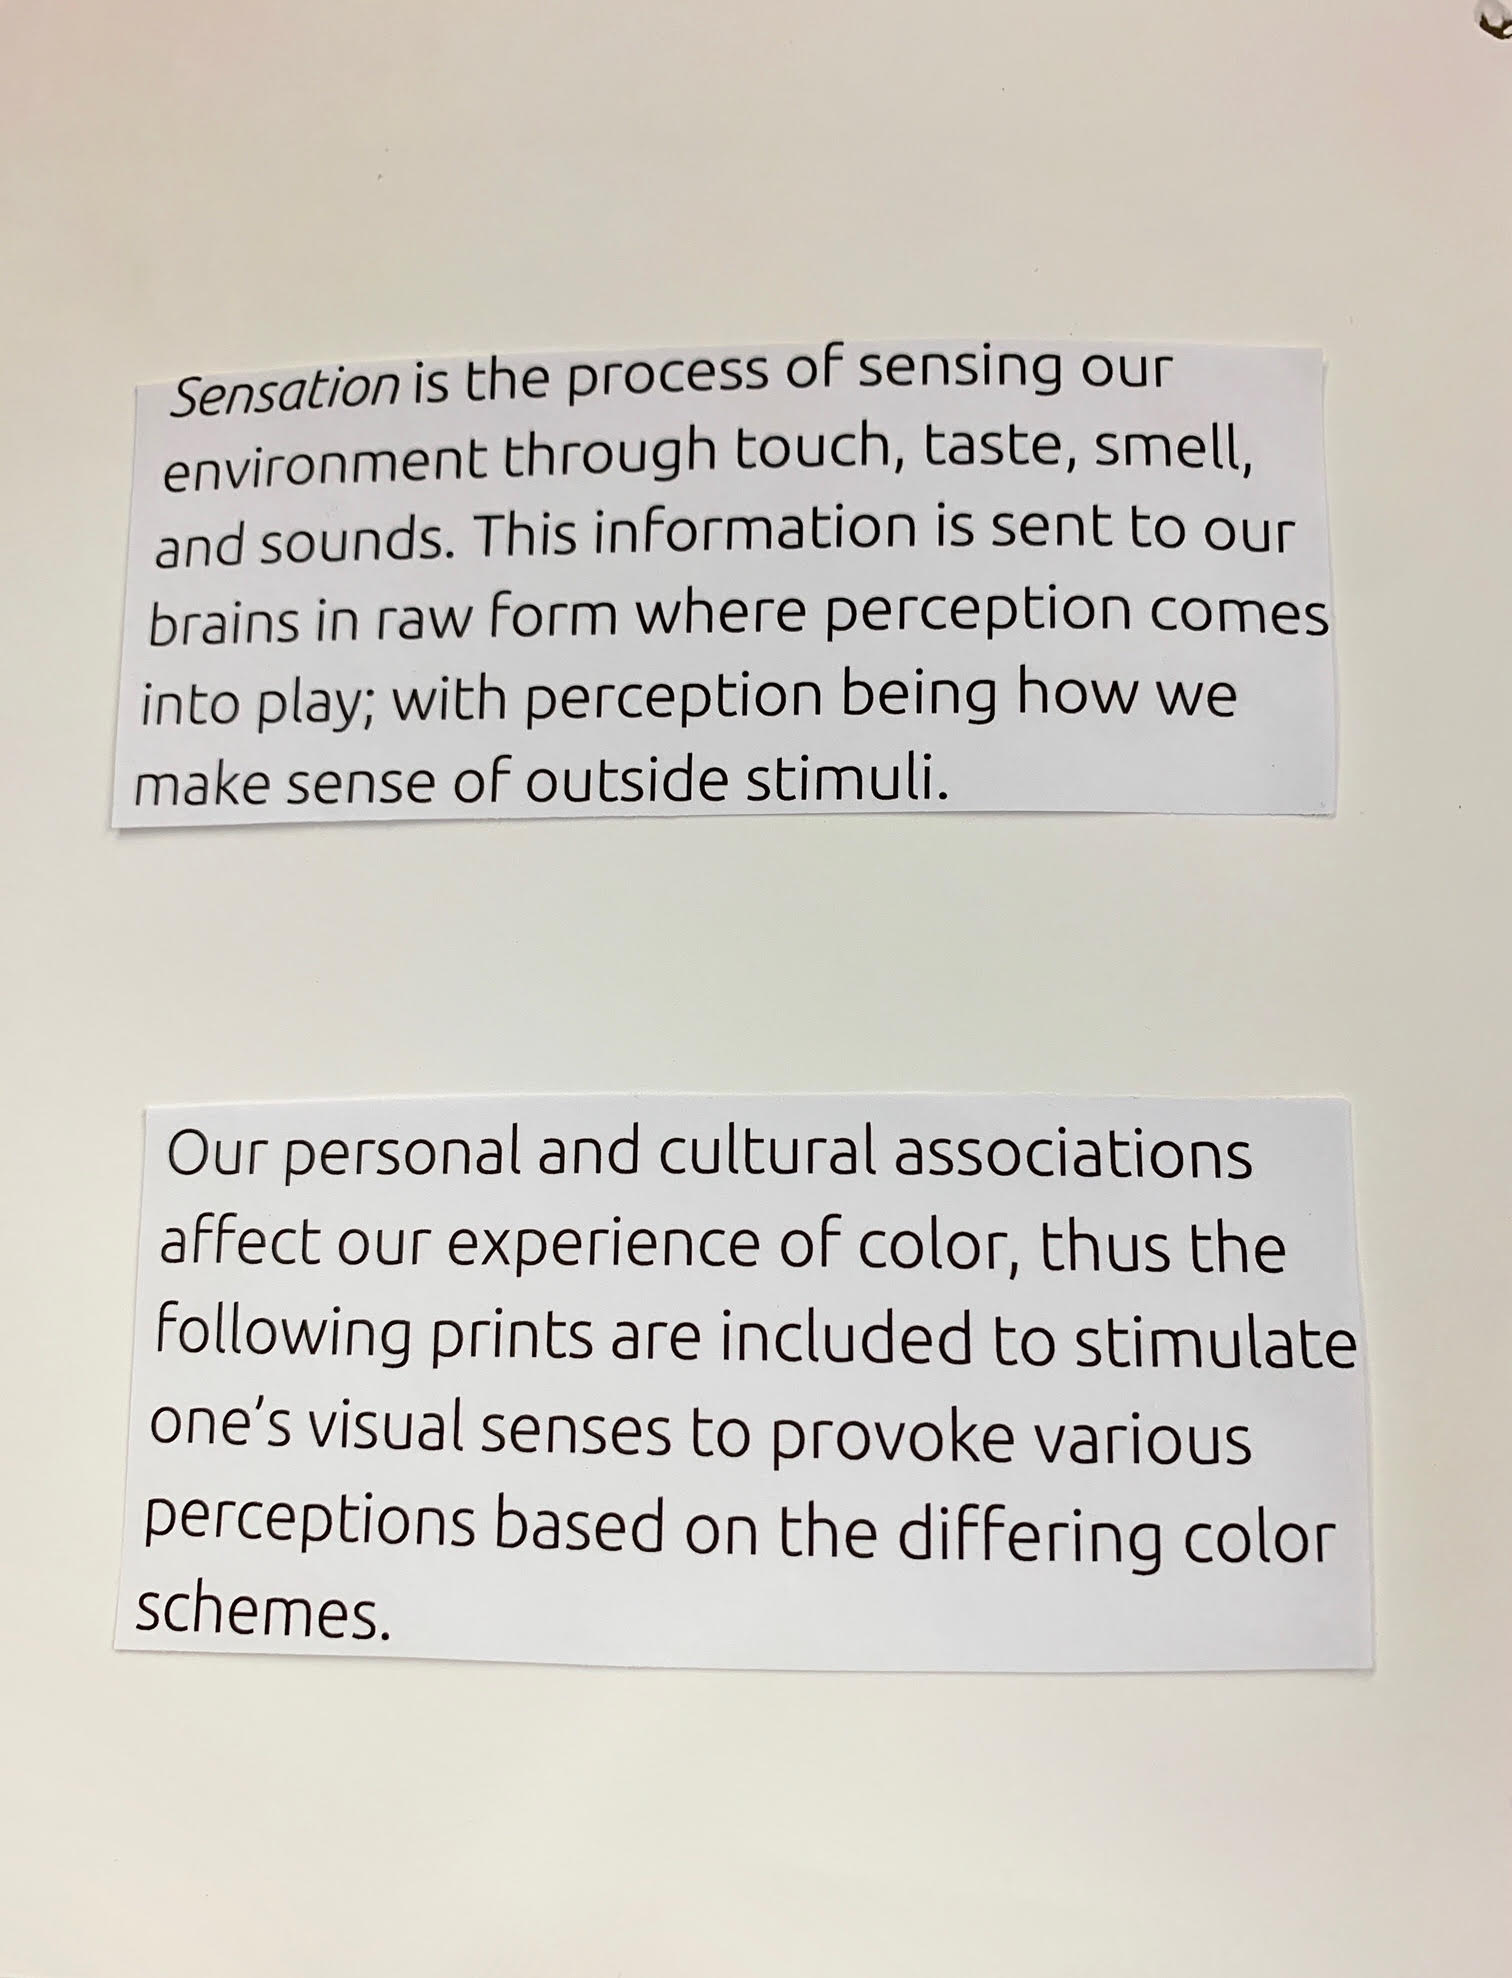 Page 2. Caption: Description of factors that influence our sensation such as our experiences in life, cultural backgrounds, and how we interact with outside stimuli with our senses. These all affect our perception. The purpose of this chapbook is to provoke various reactions from the viewer through differing color schemes throughout the same print subject.